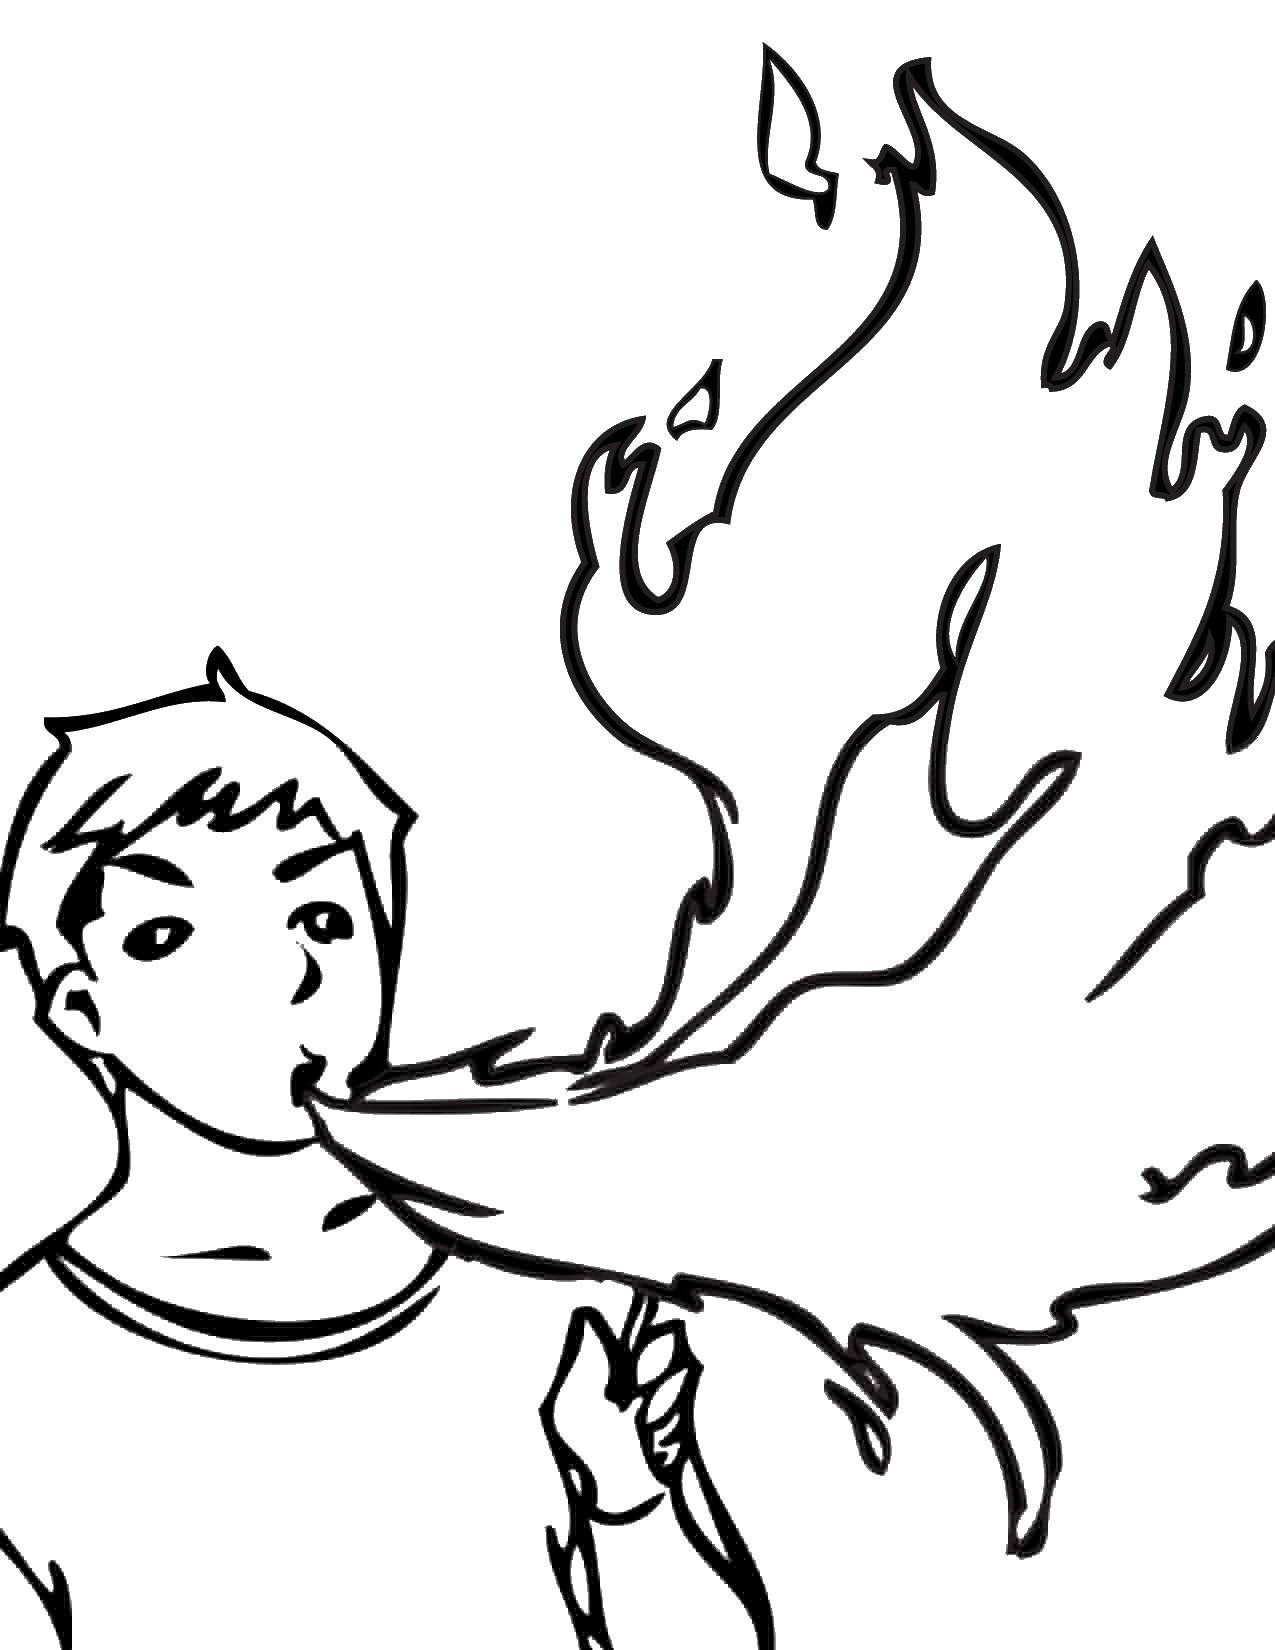 Coloring The fakir with the flame. Category Fire. Tags:  fire.